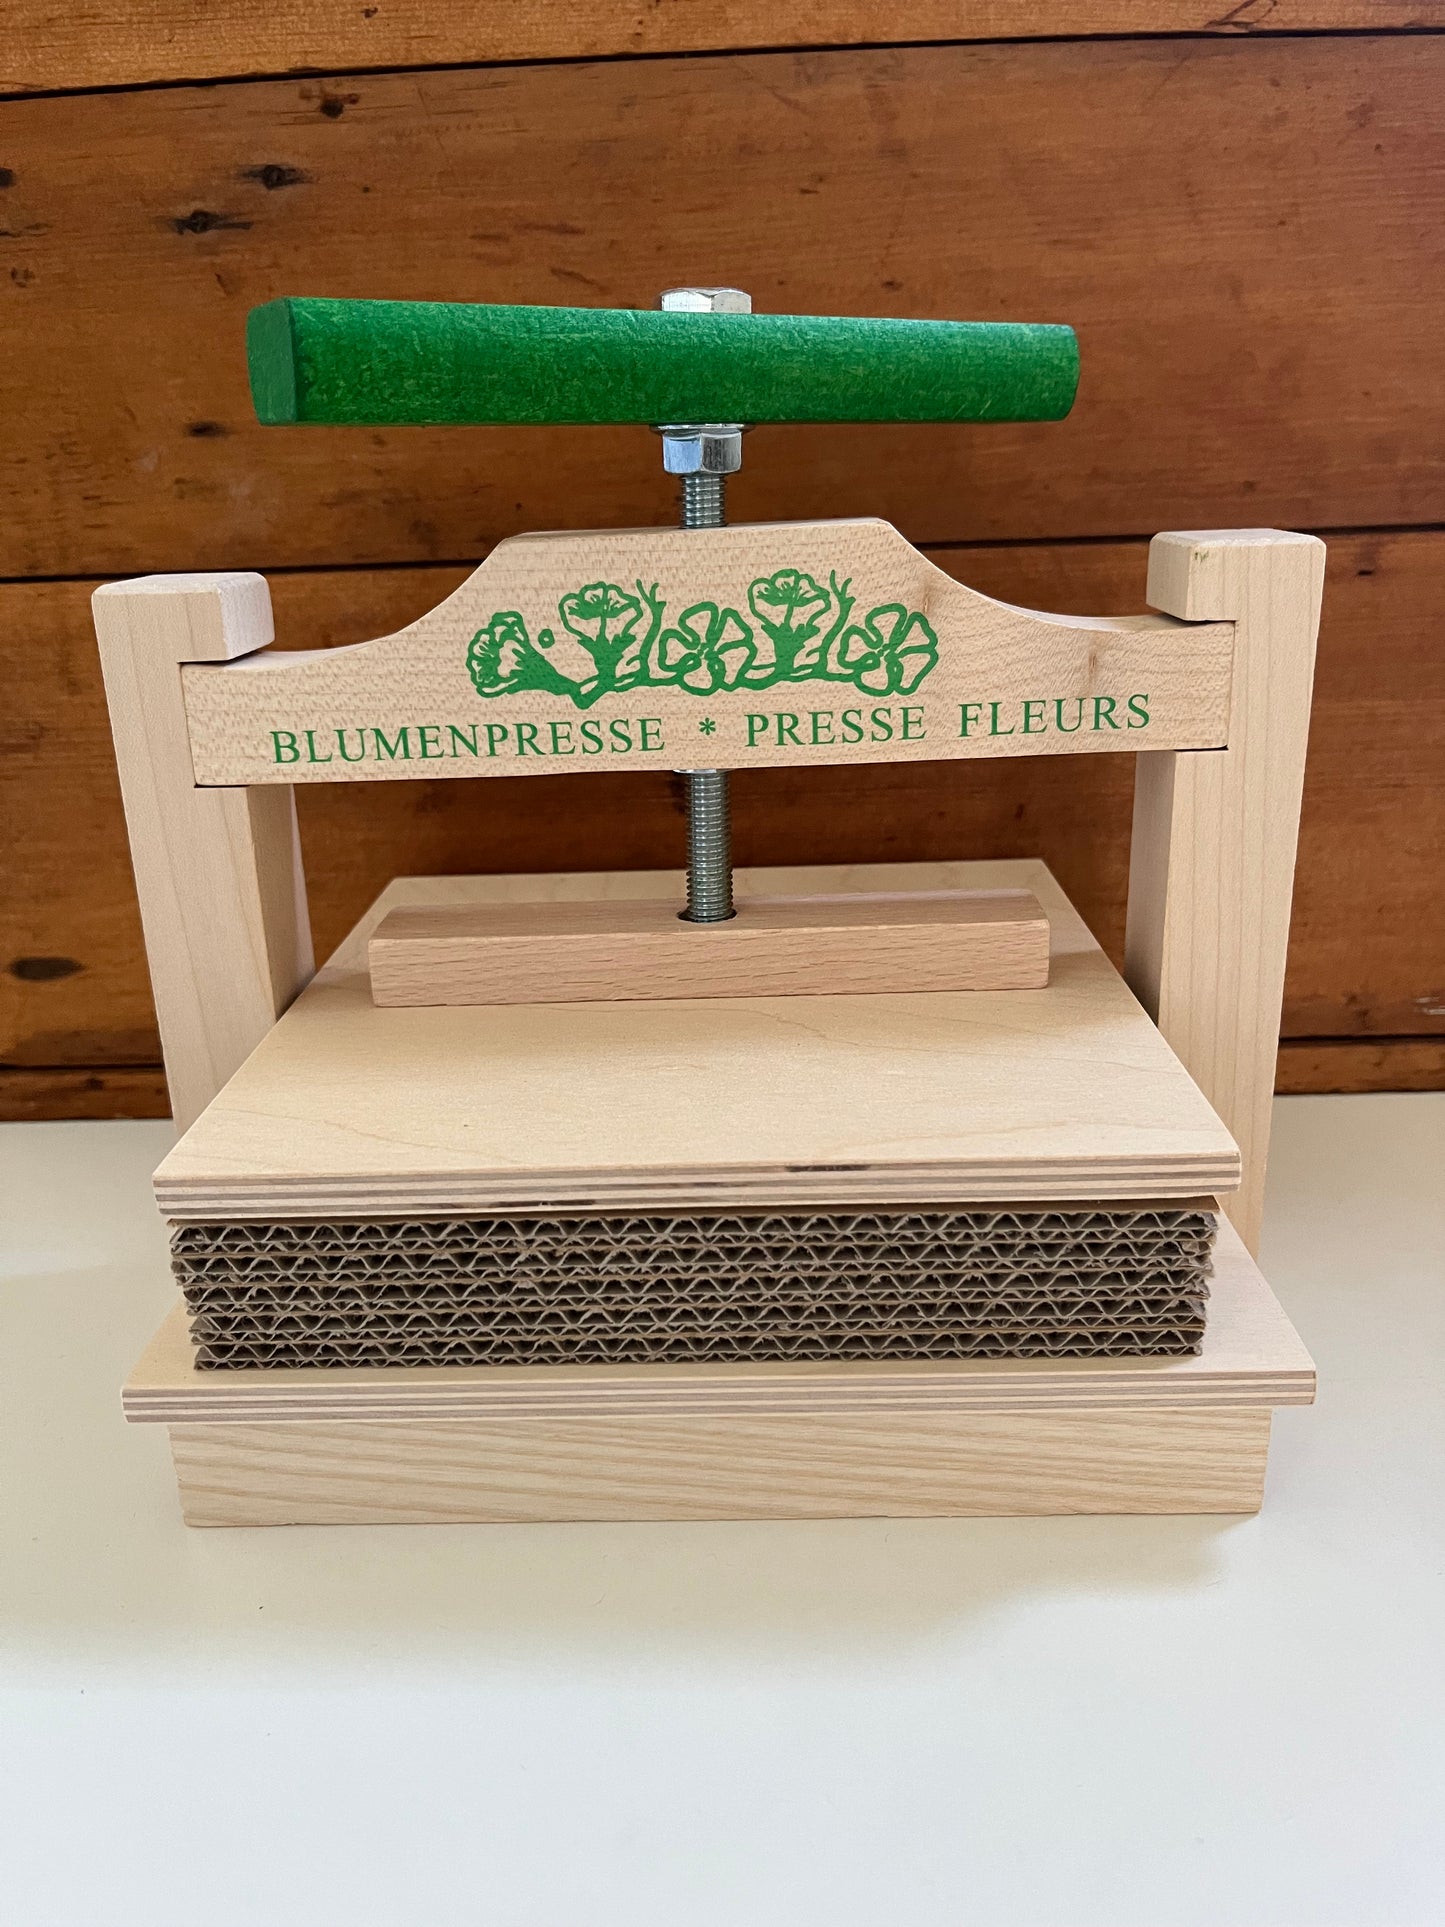 Educational Wooden Toy - FLOWER PRESS (large!)